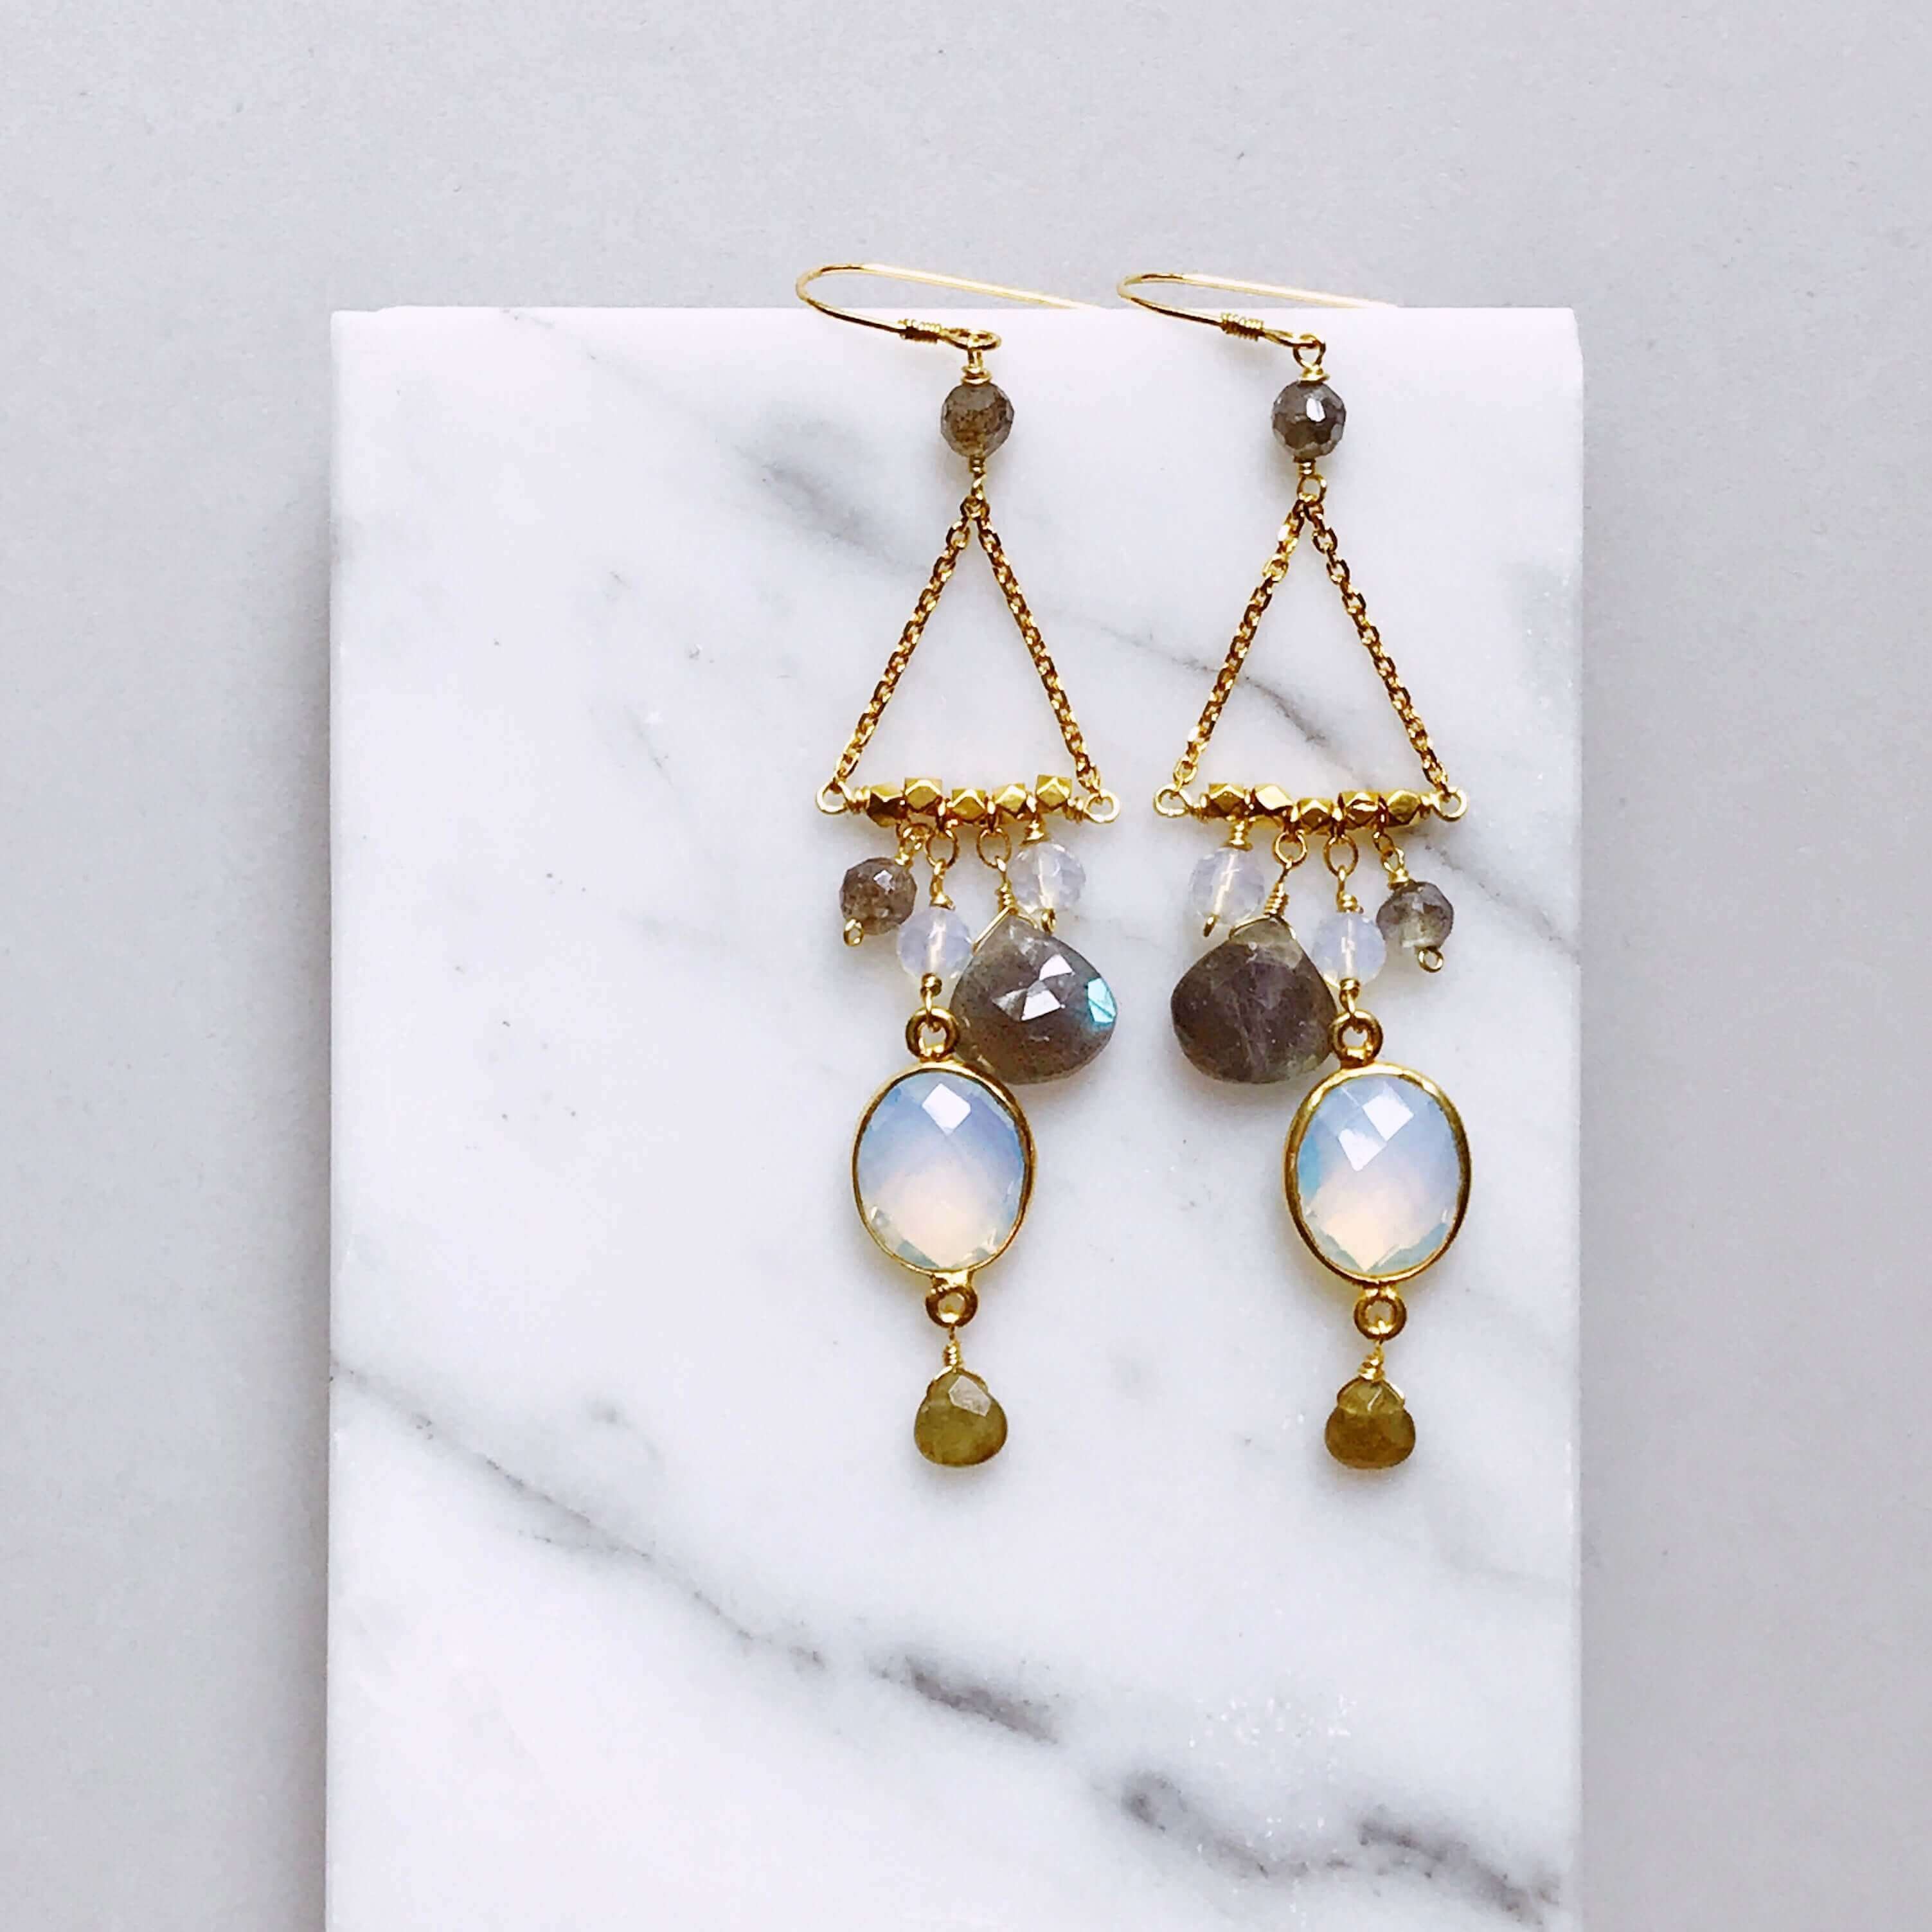 Gold plated Earrings with bezel-set opal quartz gemstones, varied faceted labradorite, and opal quartz accent stones